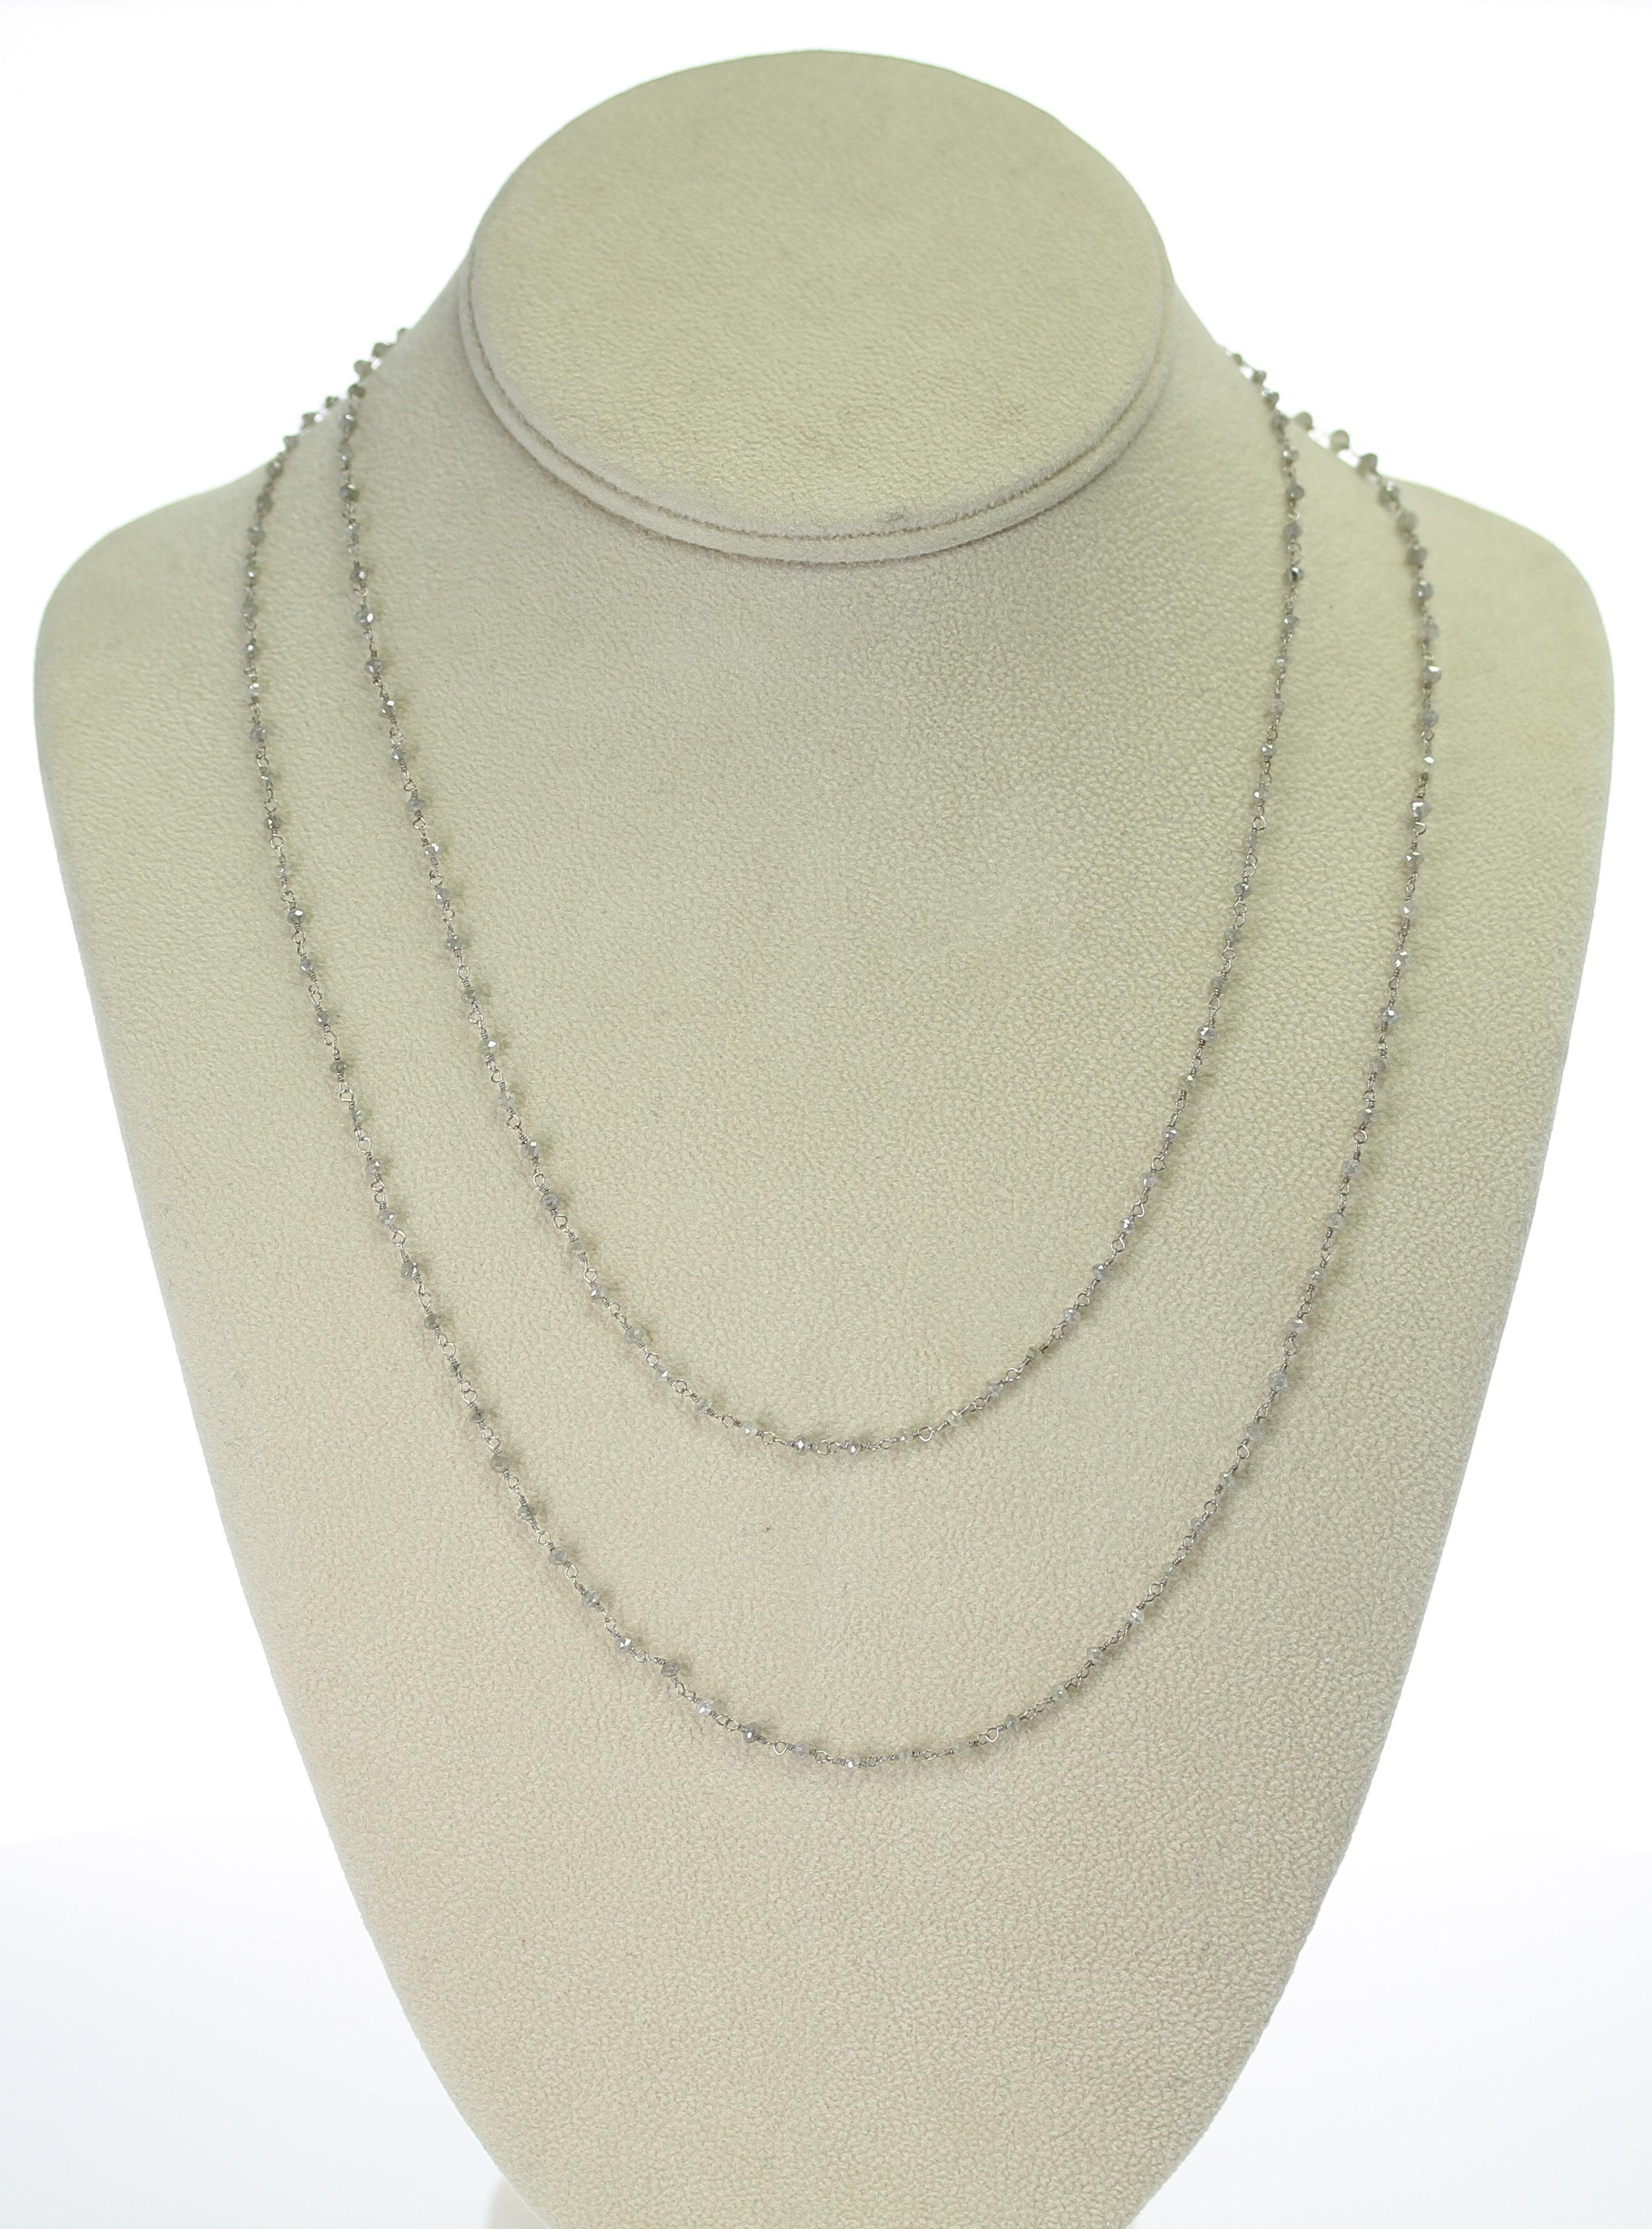 A Genuine Gray Diamond Beads Wire-Wrapped Necklace 40